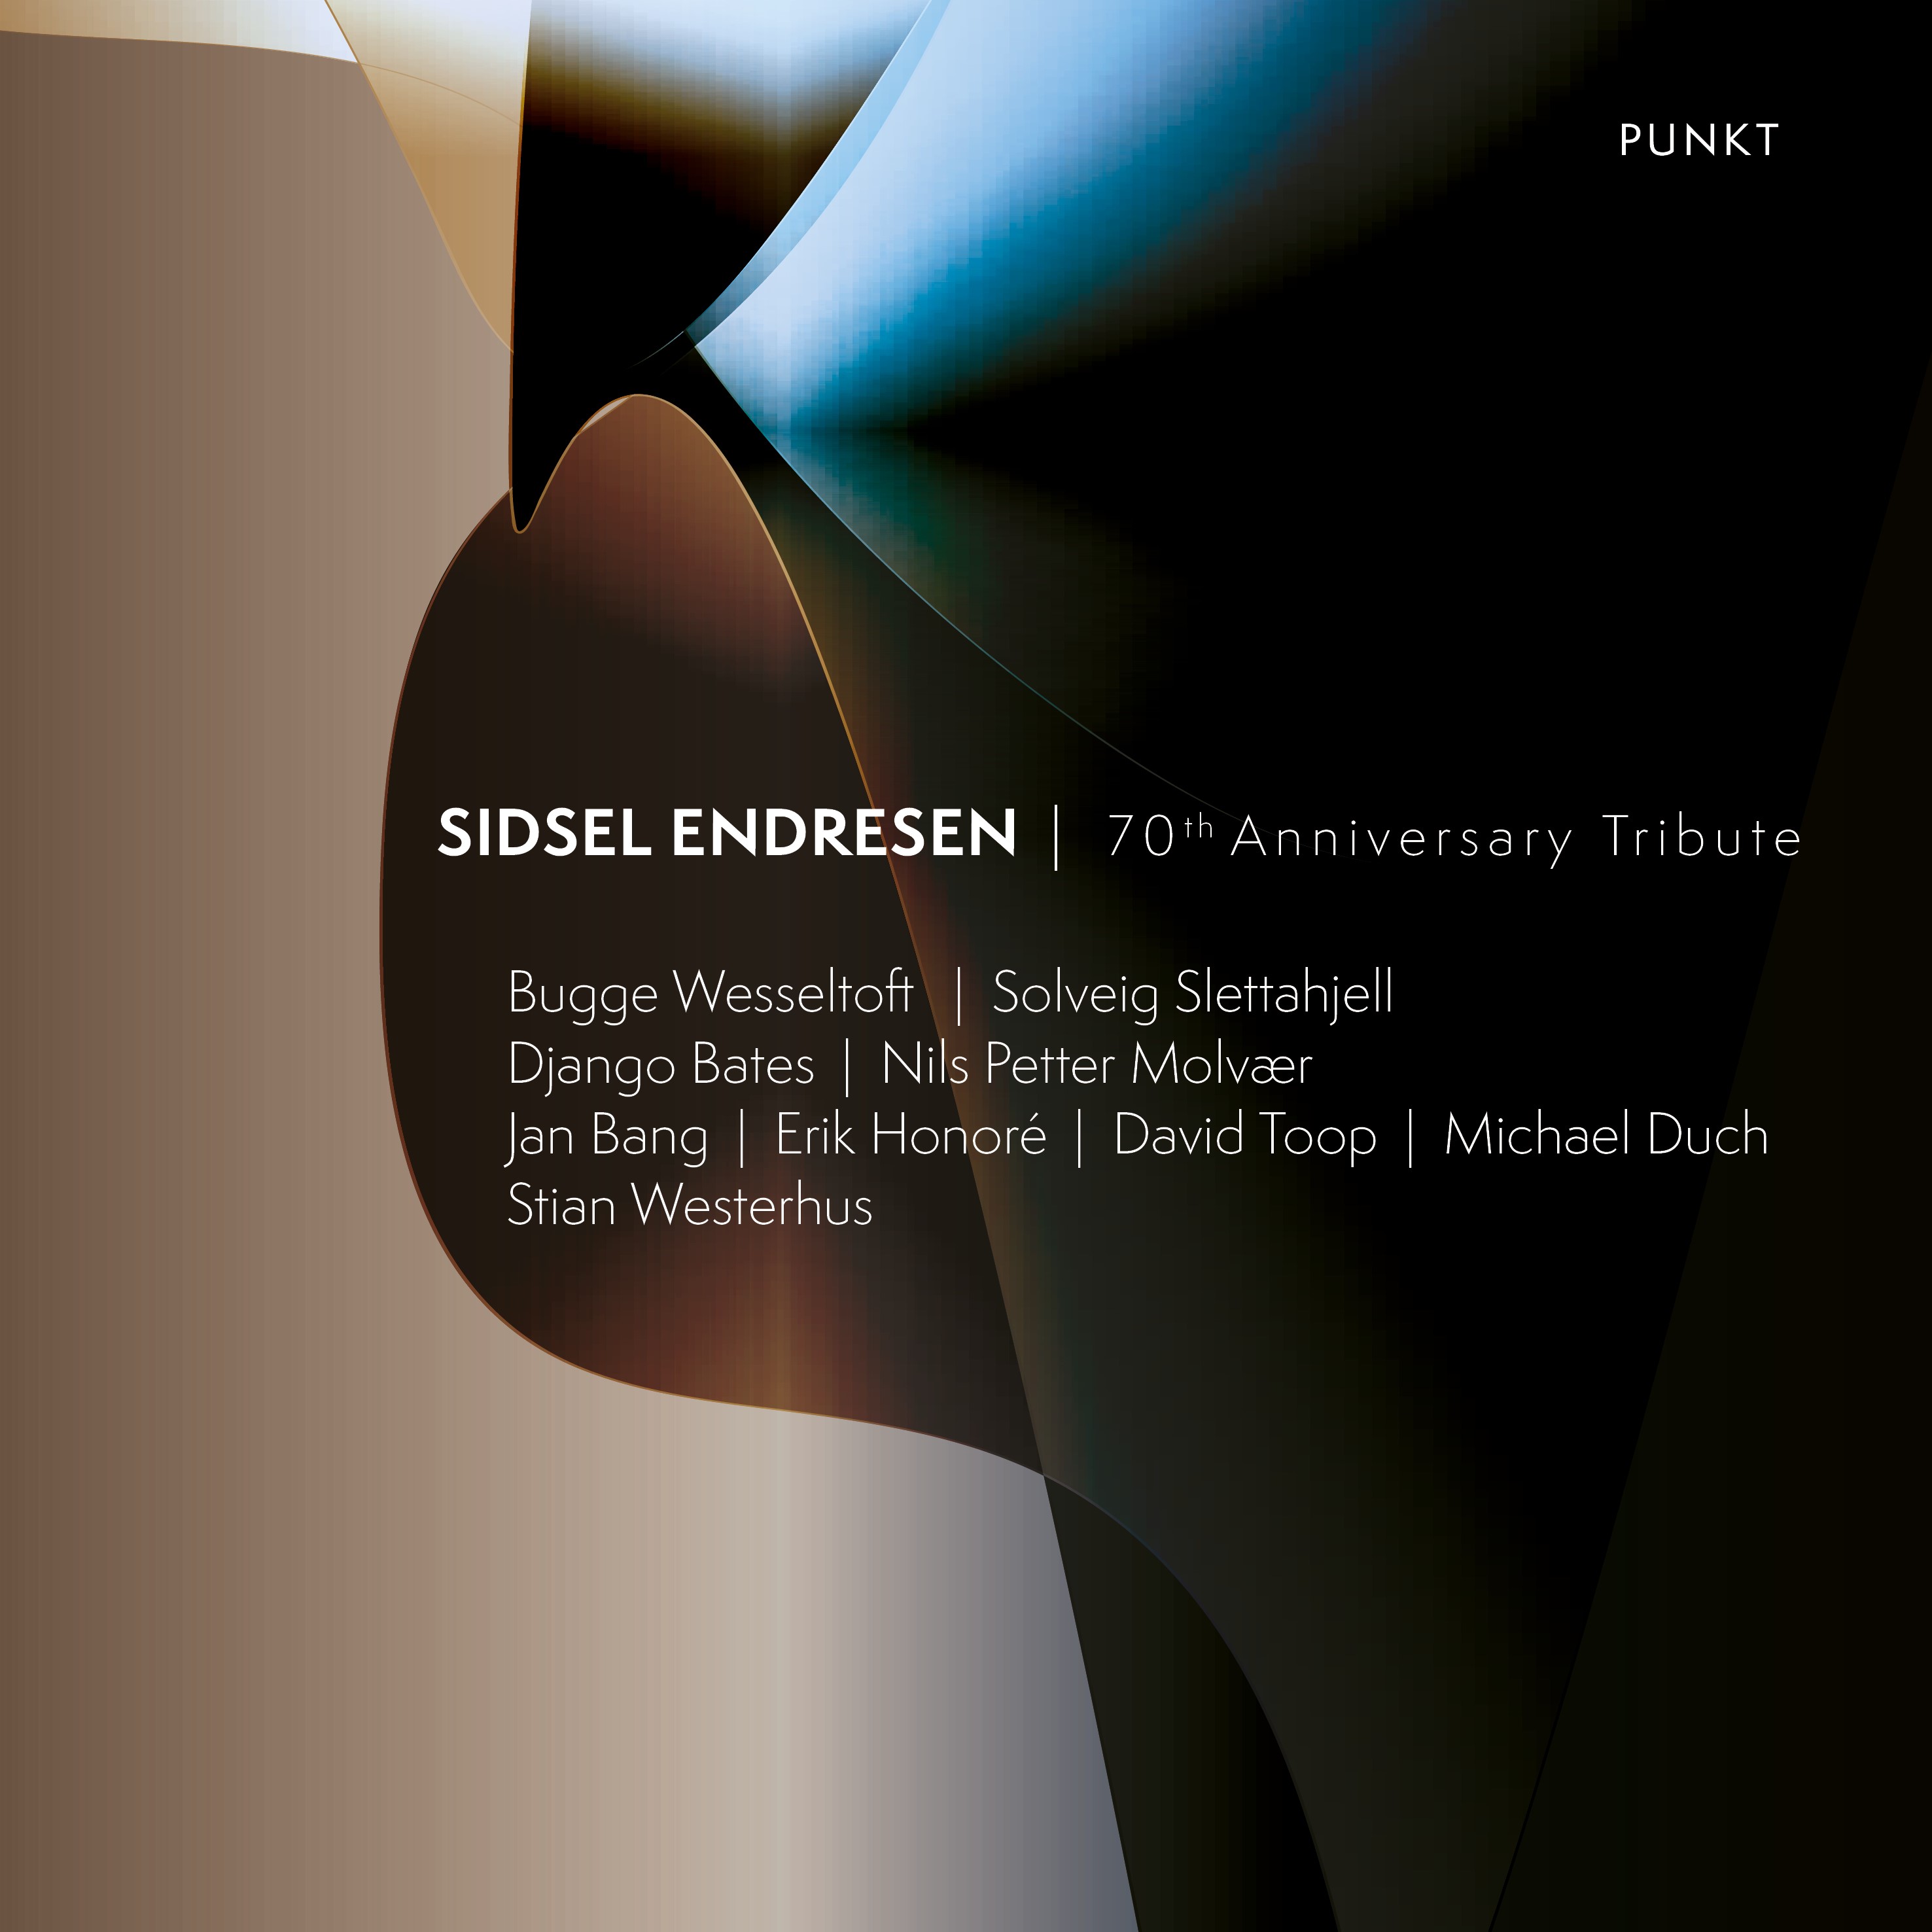 Sidsel Endresen 70th Anniversary Tribute Concert